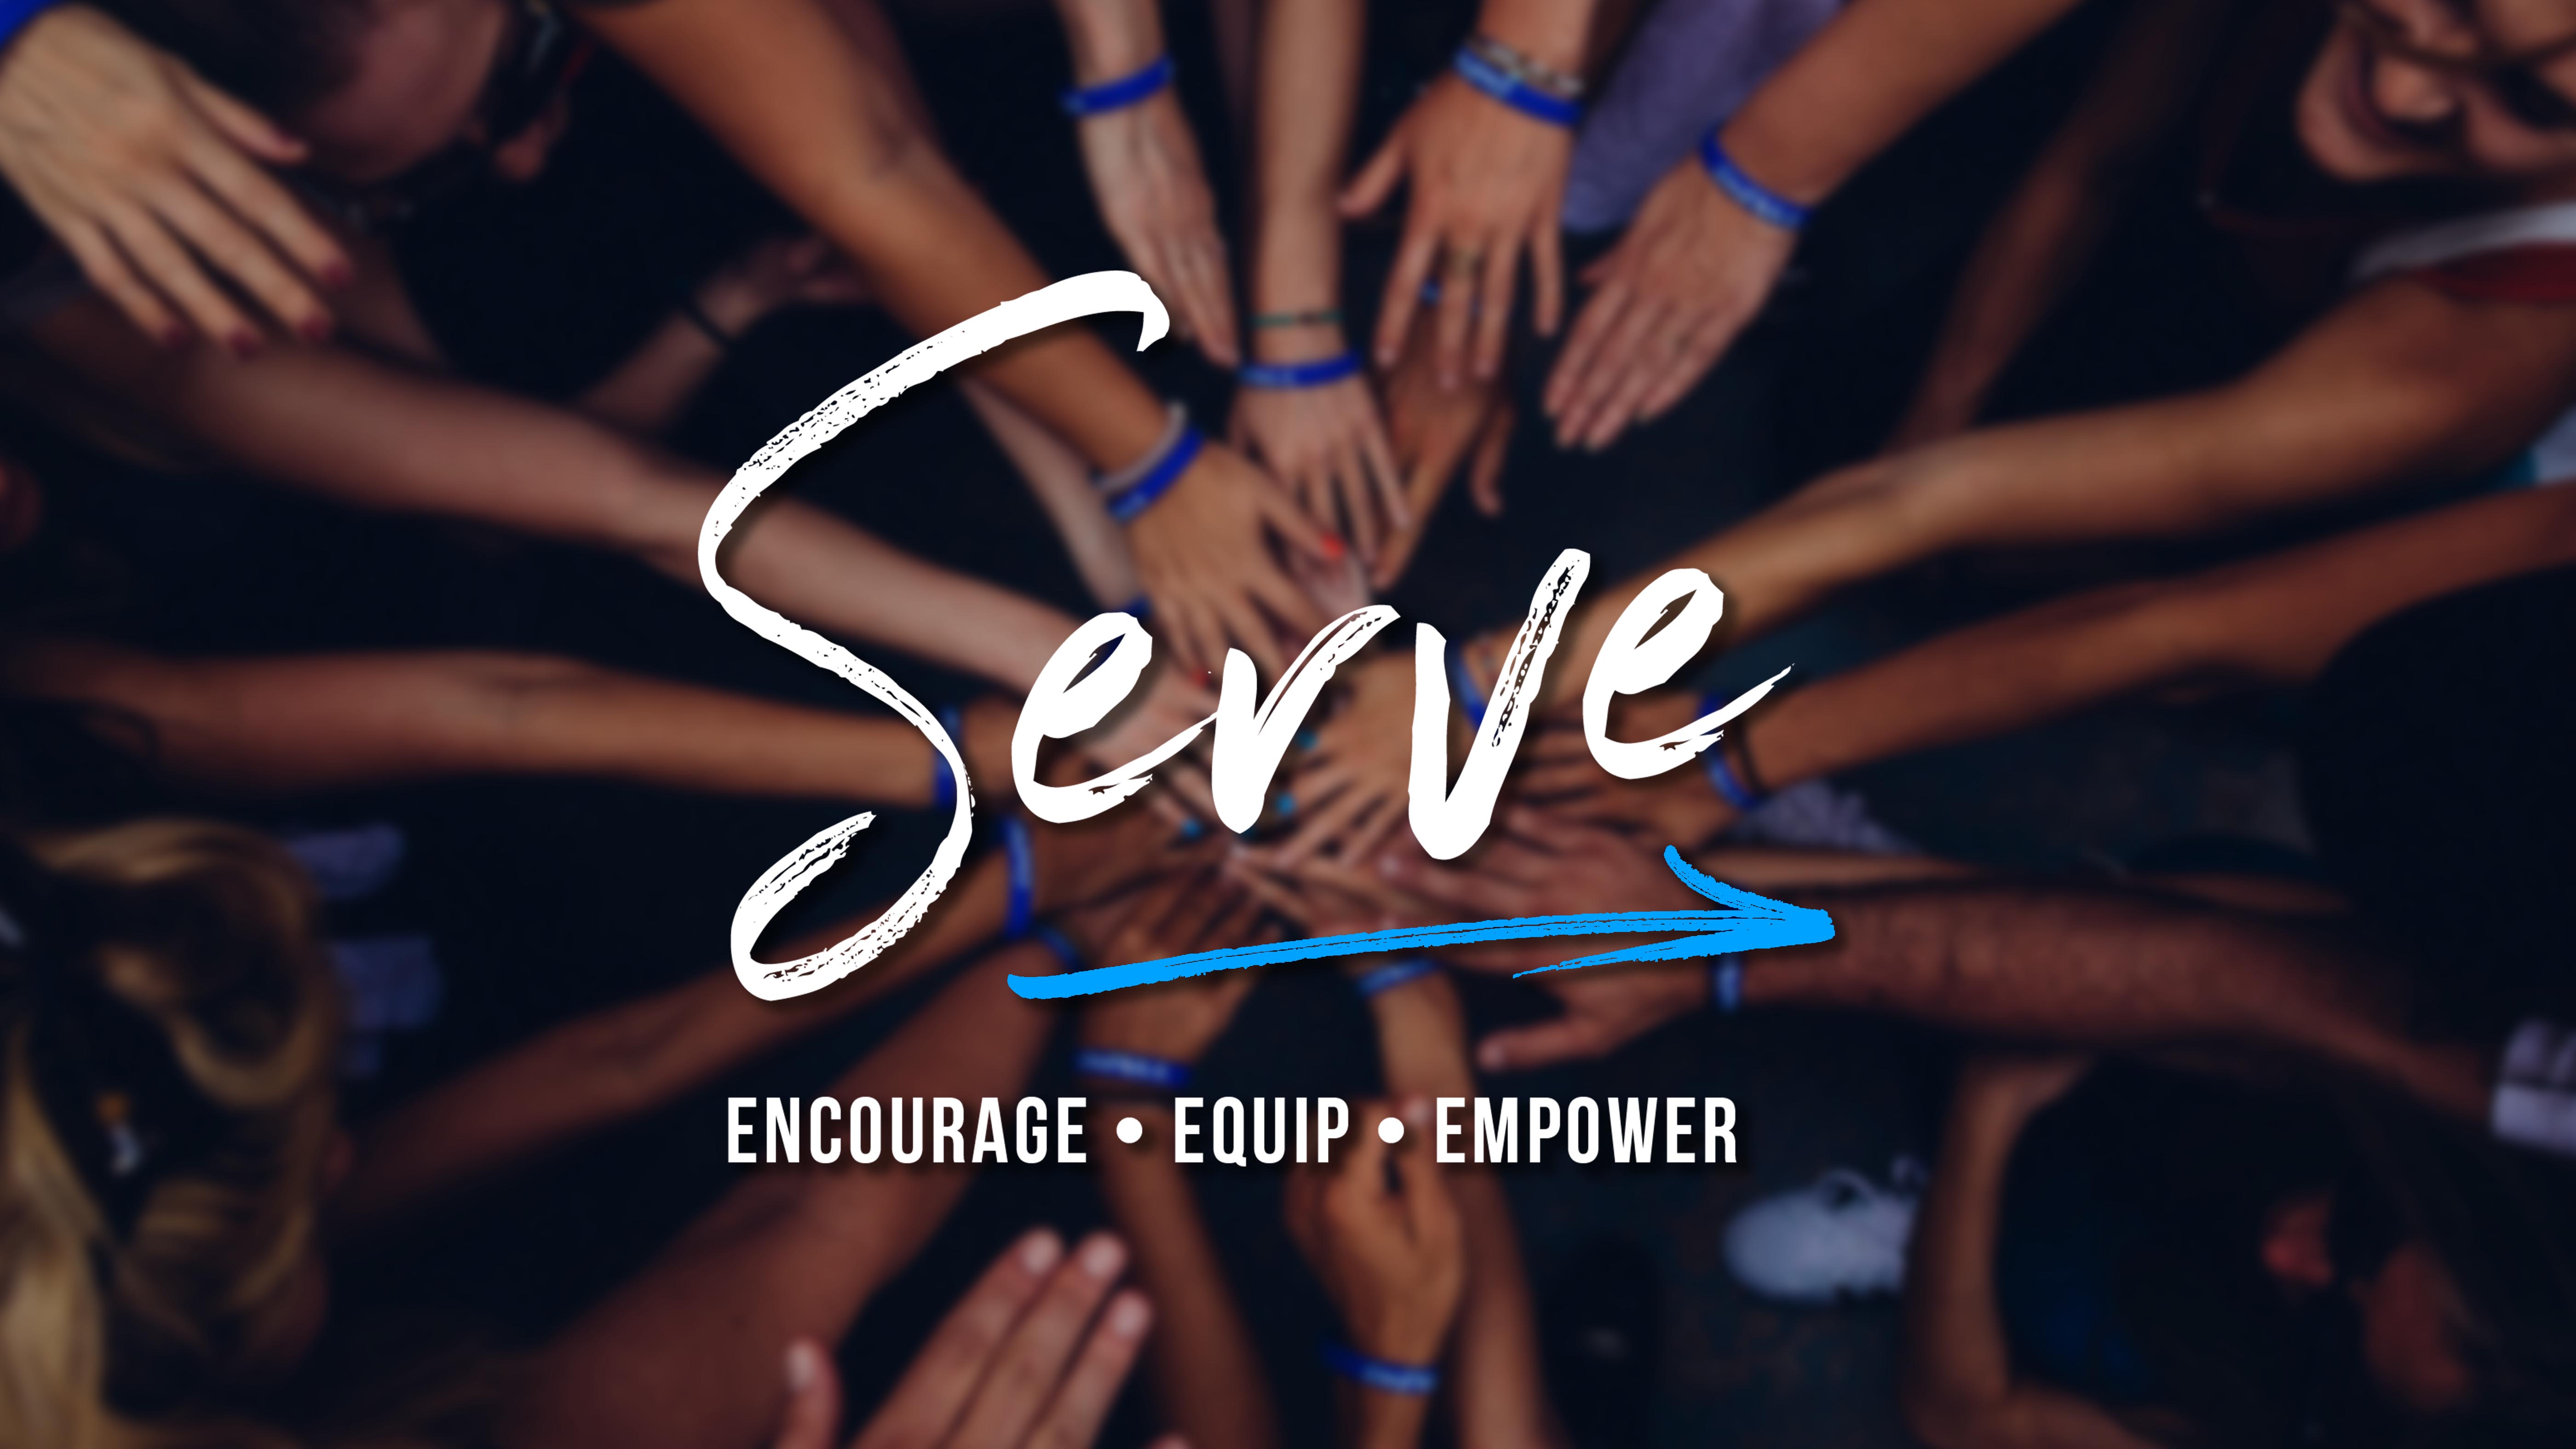 Live out your purpose to CARE for others!

Check out opportunities to serve
